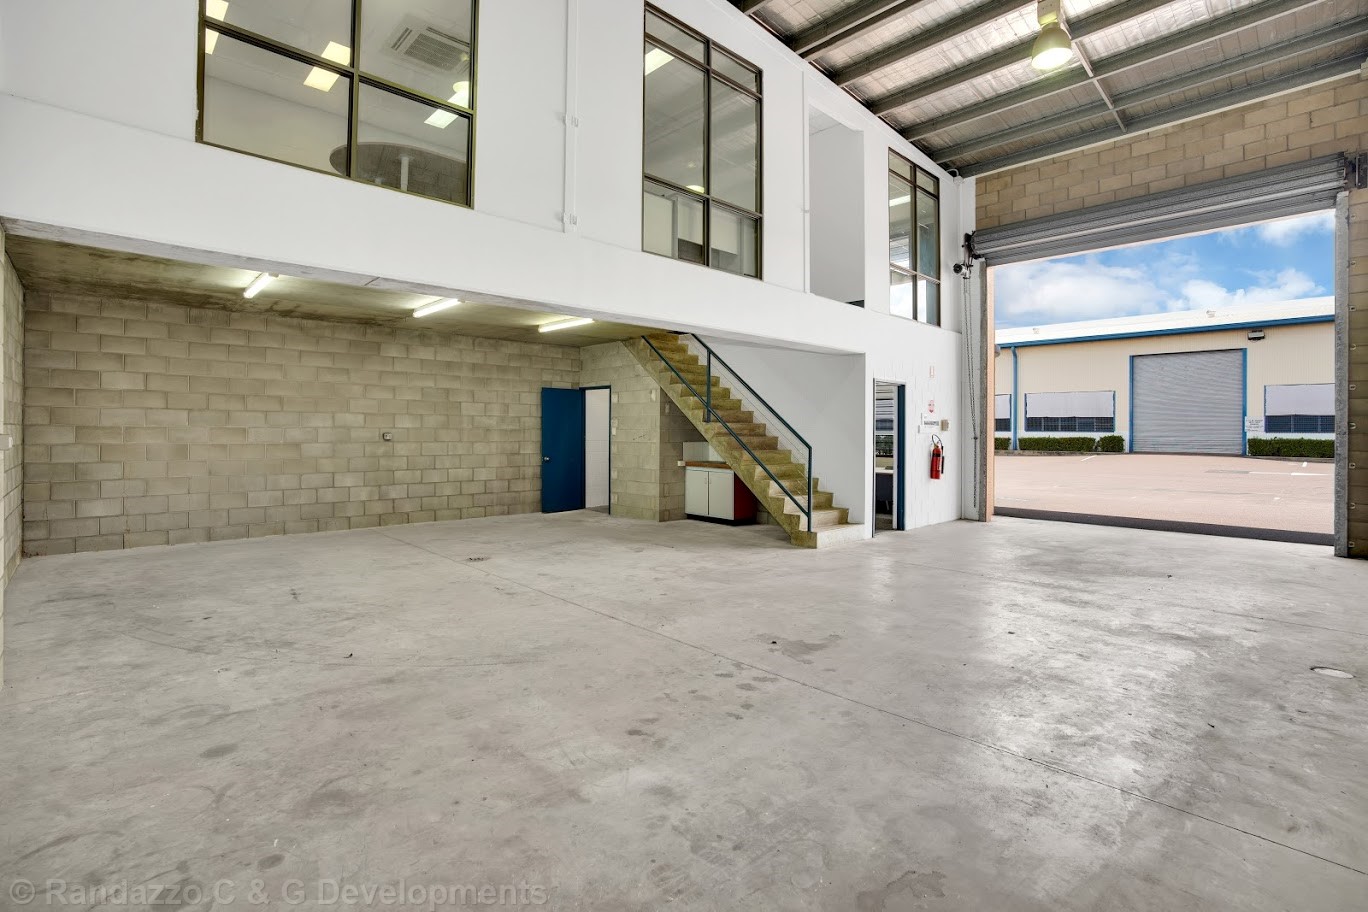 UNIT 6 - Industrial/Warehouse with Office Space